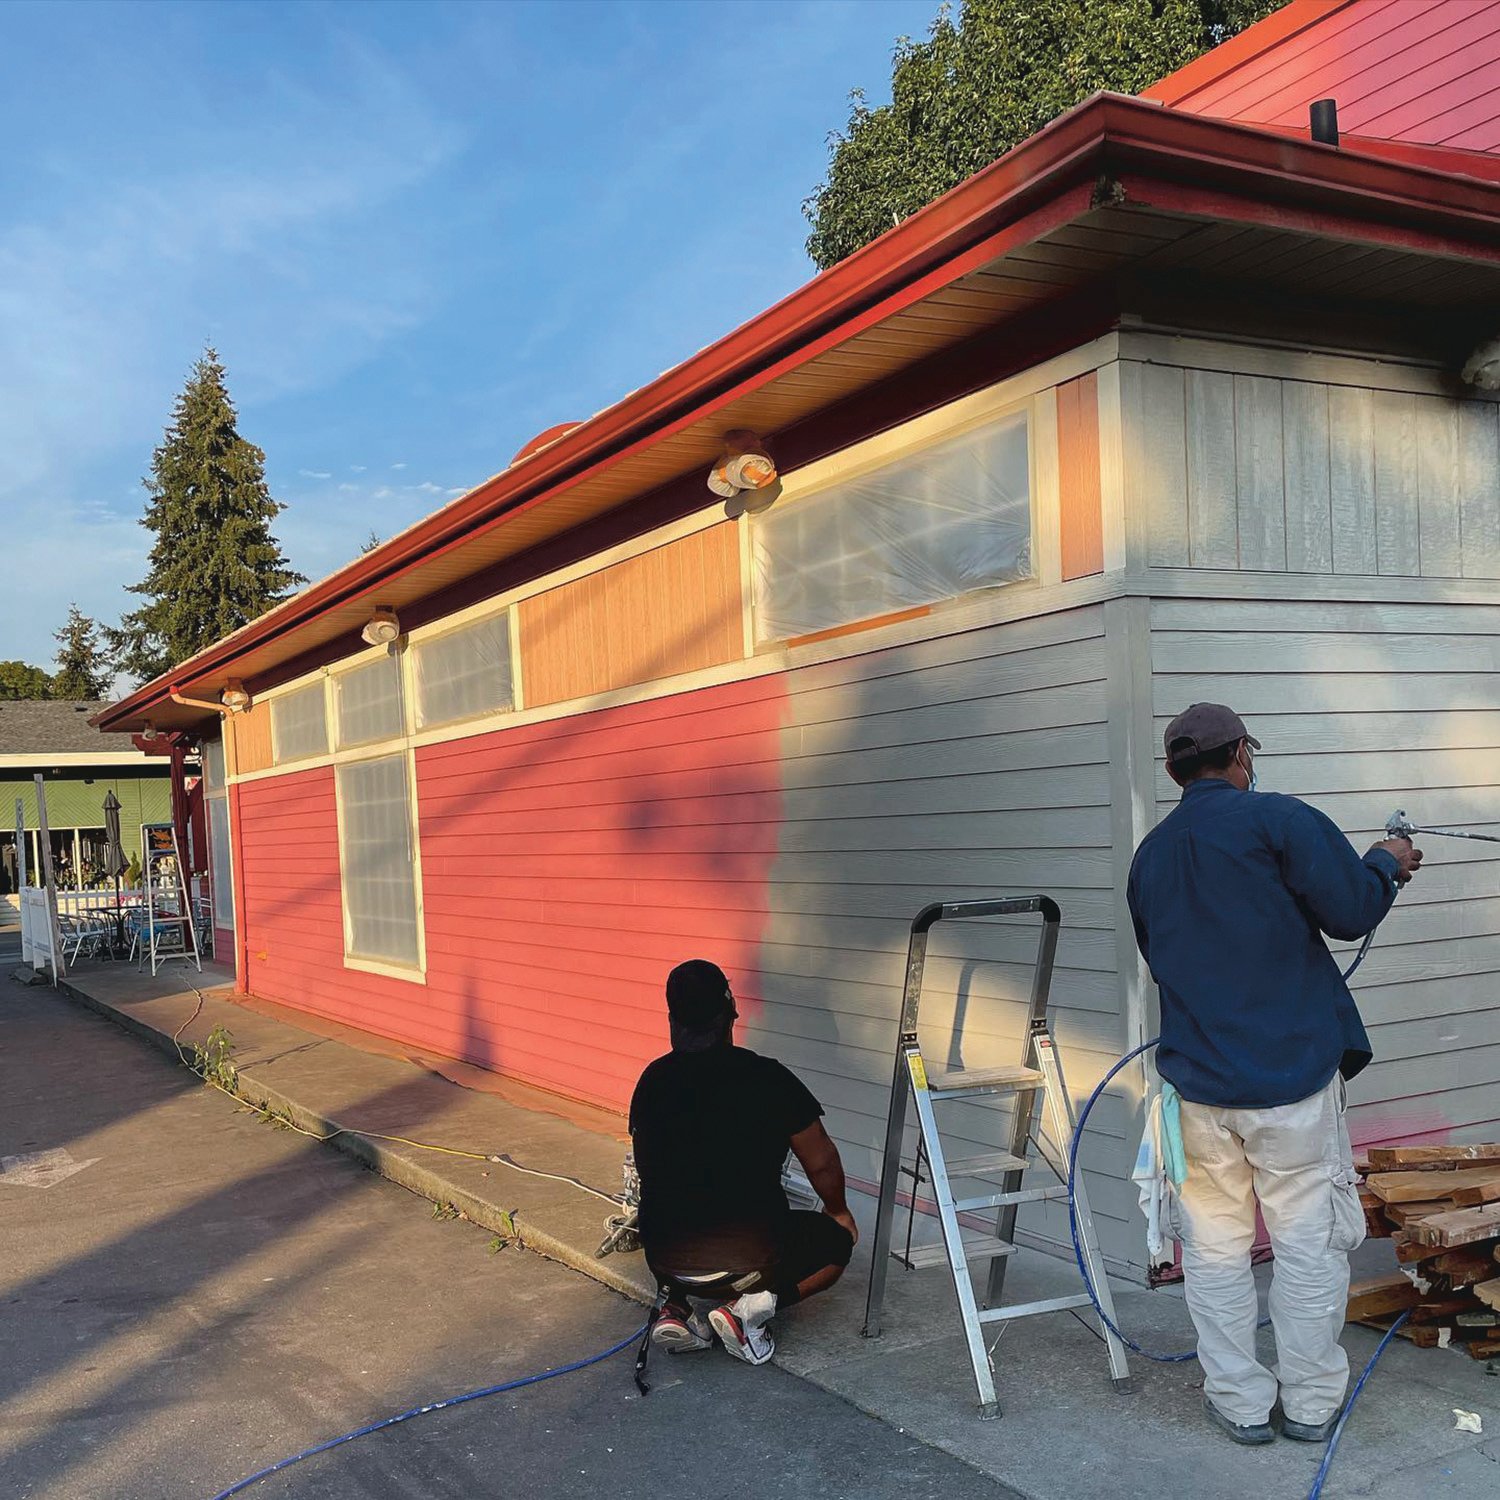 A new coat of paint is applied to the exterior of the The Local, a new sports bar and restaurant that plans to open in Yelm later this month.